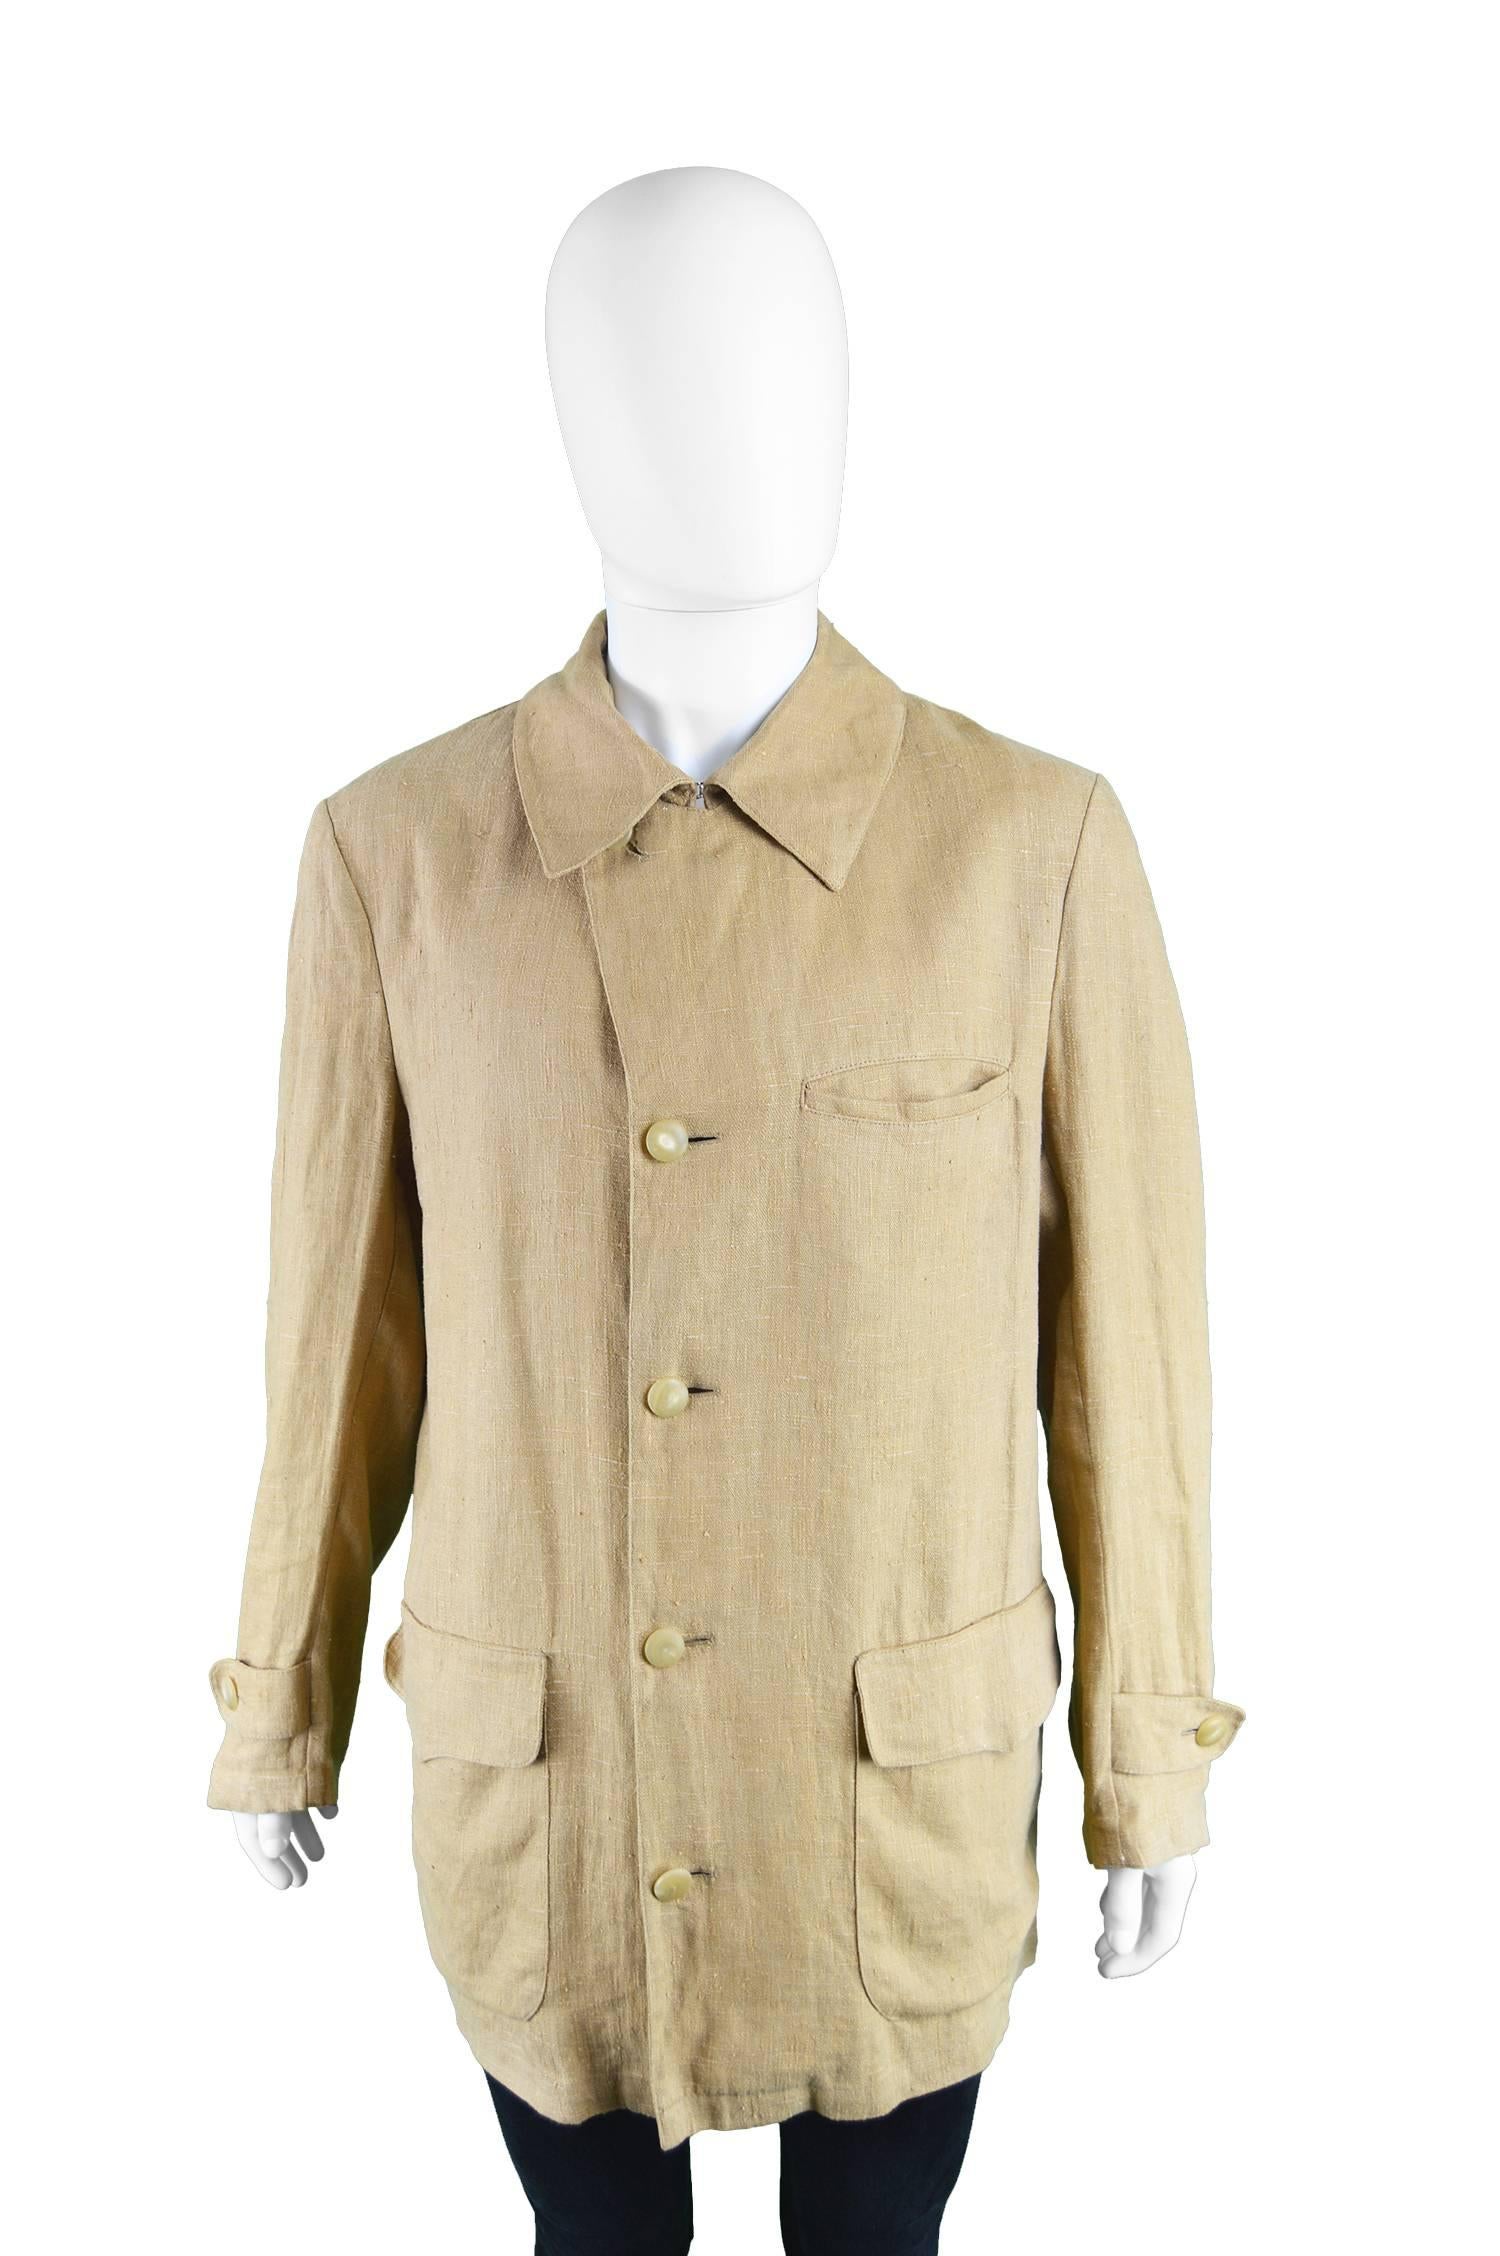 An excellent vintage men's jacket from the 90s by Italian luxury designer Nino Cerruti for Cerruti 1881. Beautifully constructed in Italy, the fabric is a khaki linen that drapes well and looks to have been inspired by chore jackets but in a more